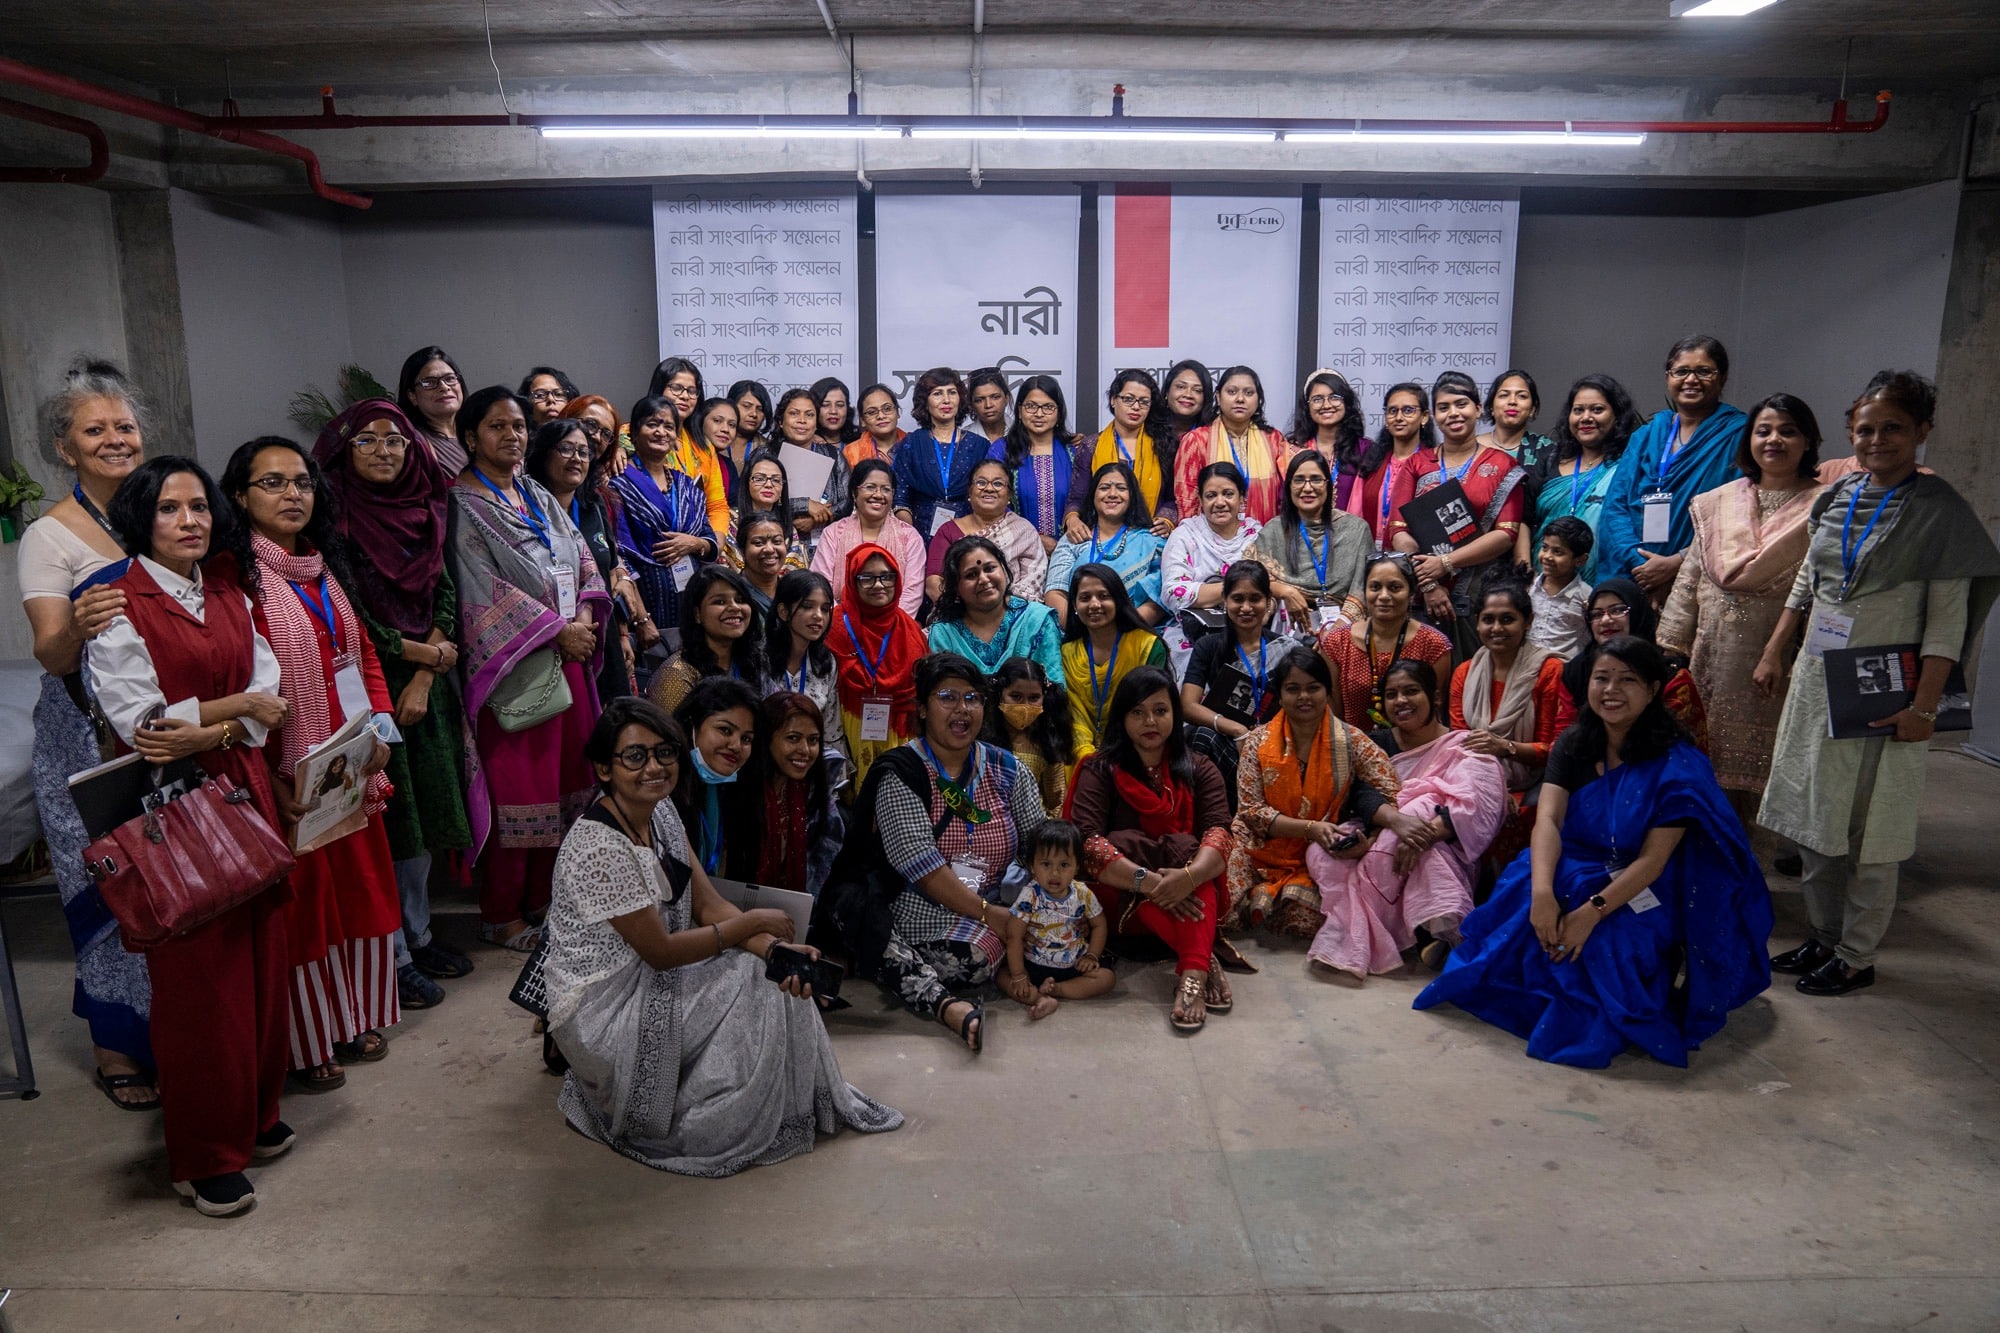 Drik hosted a conference of women journalists from all the divisions of Bangladesh